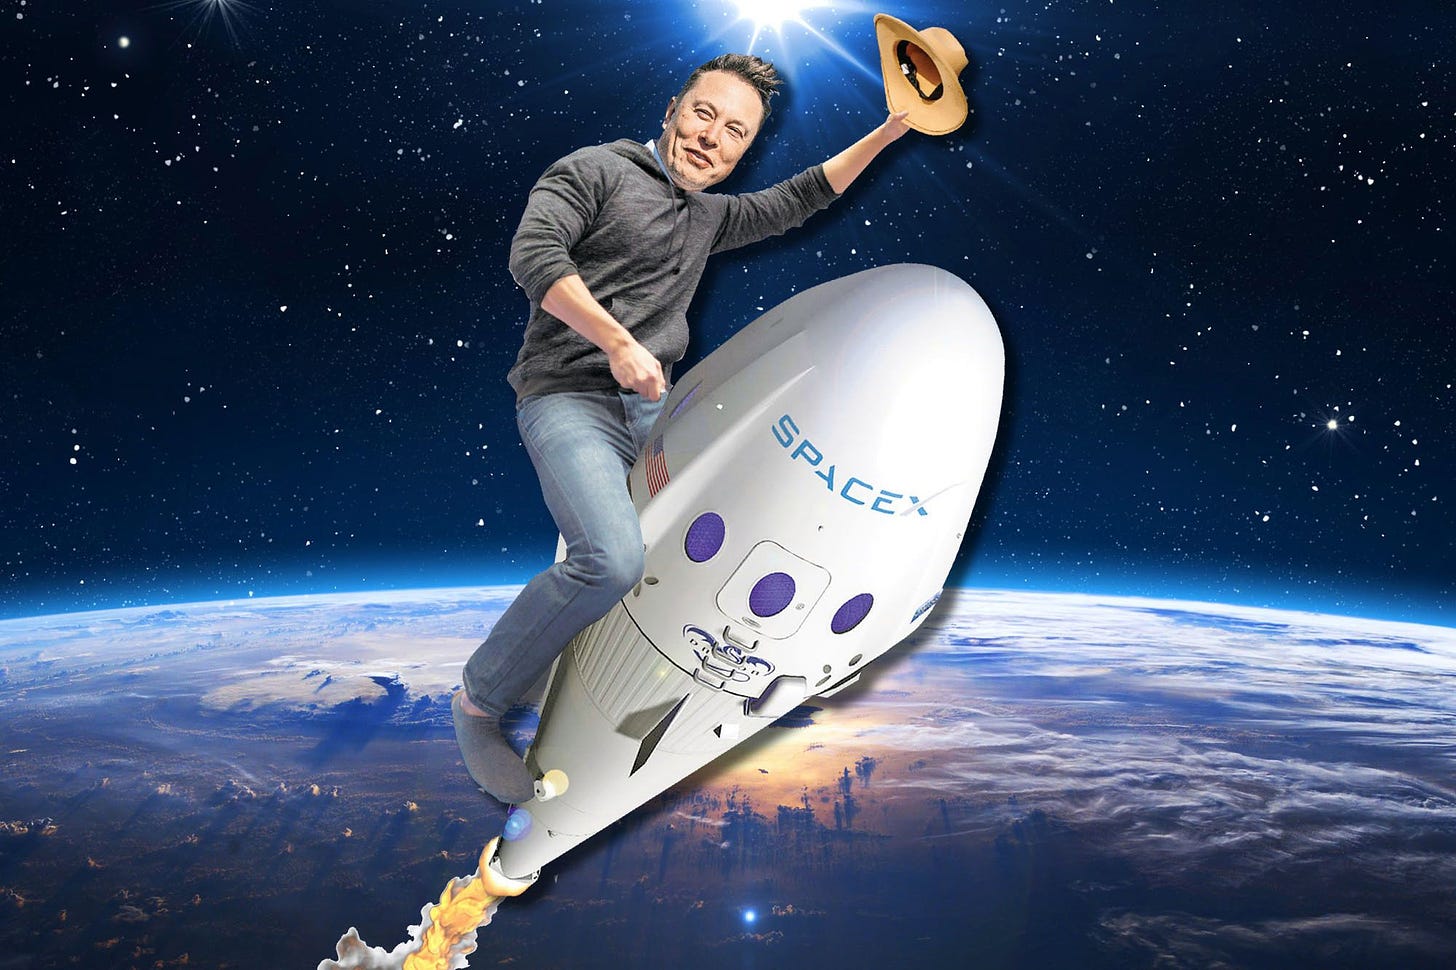 Shares of Elon Musk's privately held SpaceX soar on satellite dreams